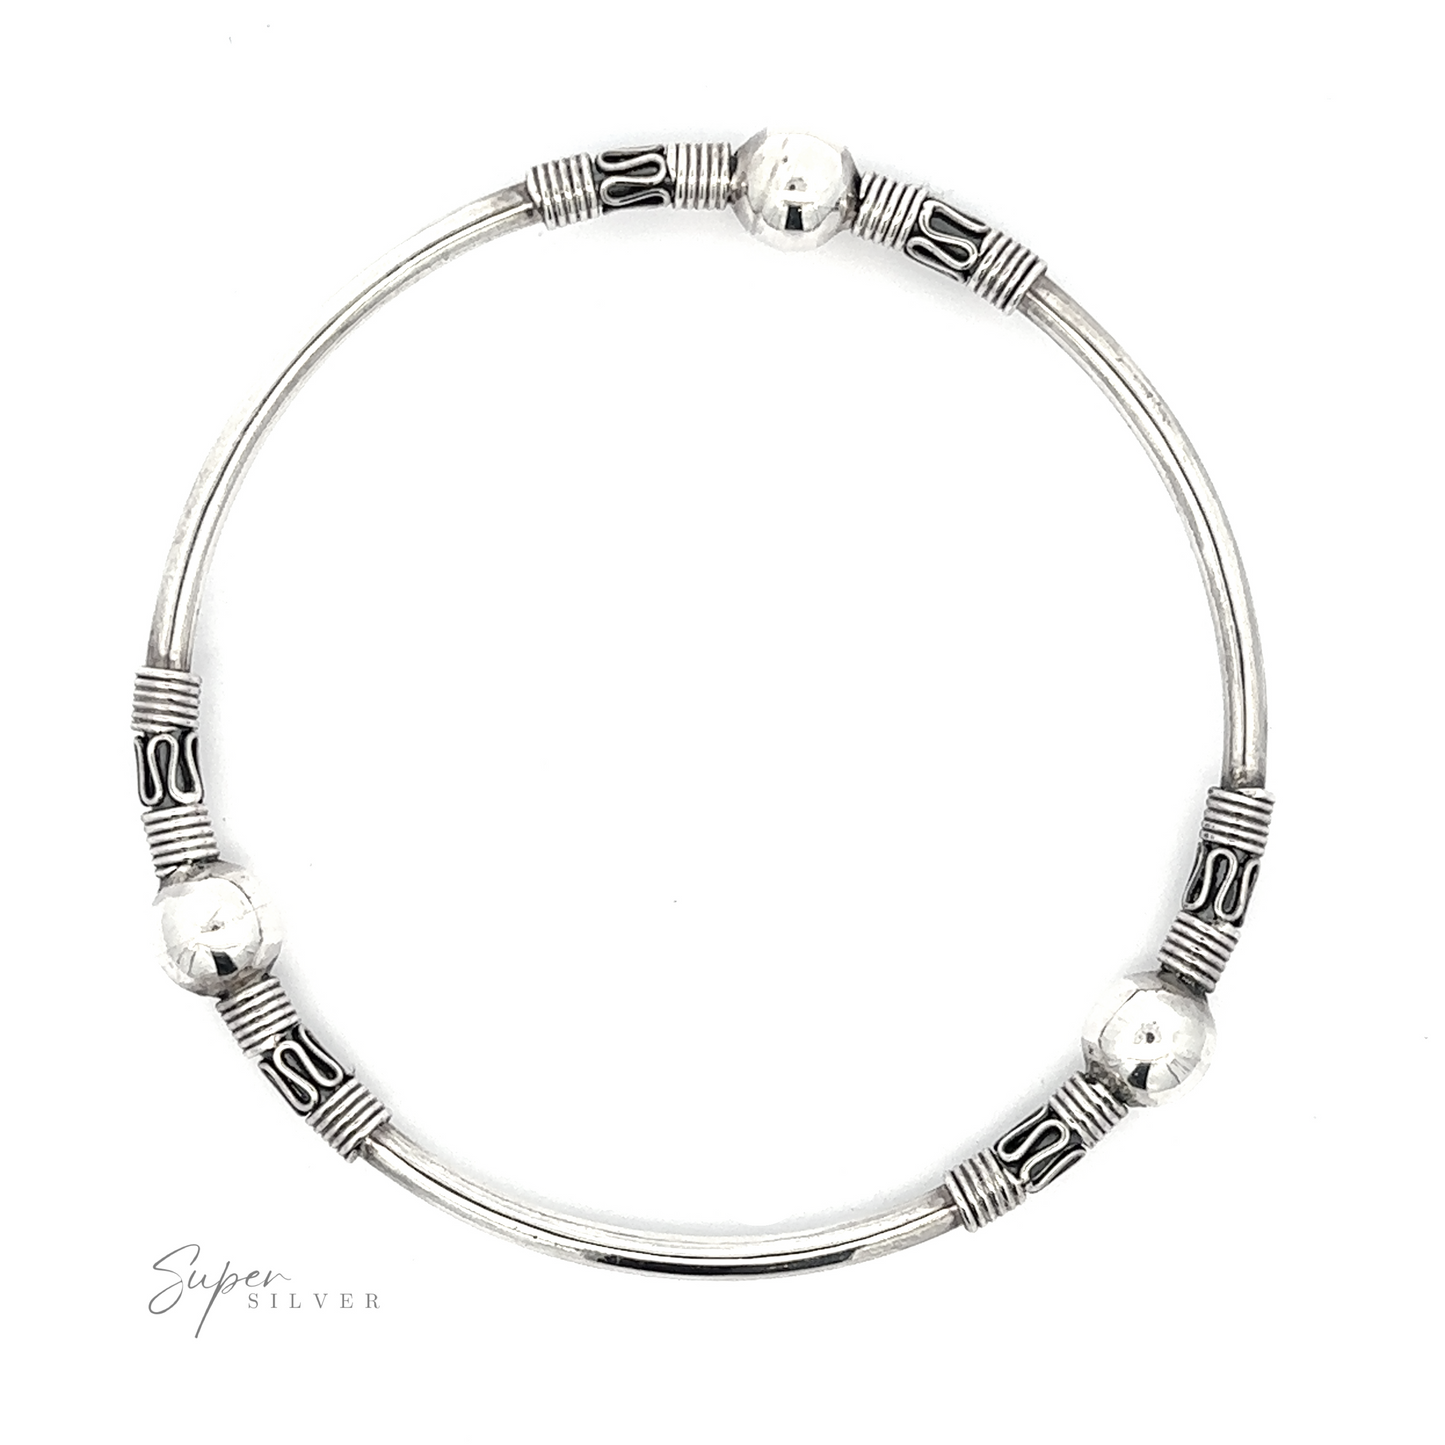 A Silver Bali Style Bangle Bracelet adorned with decorative beads and intricate patterns, capturing the essence of a Balinese style bangle.